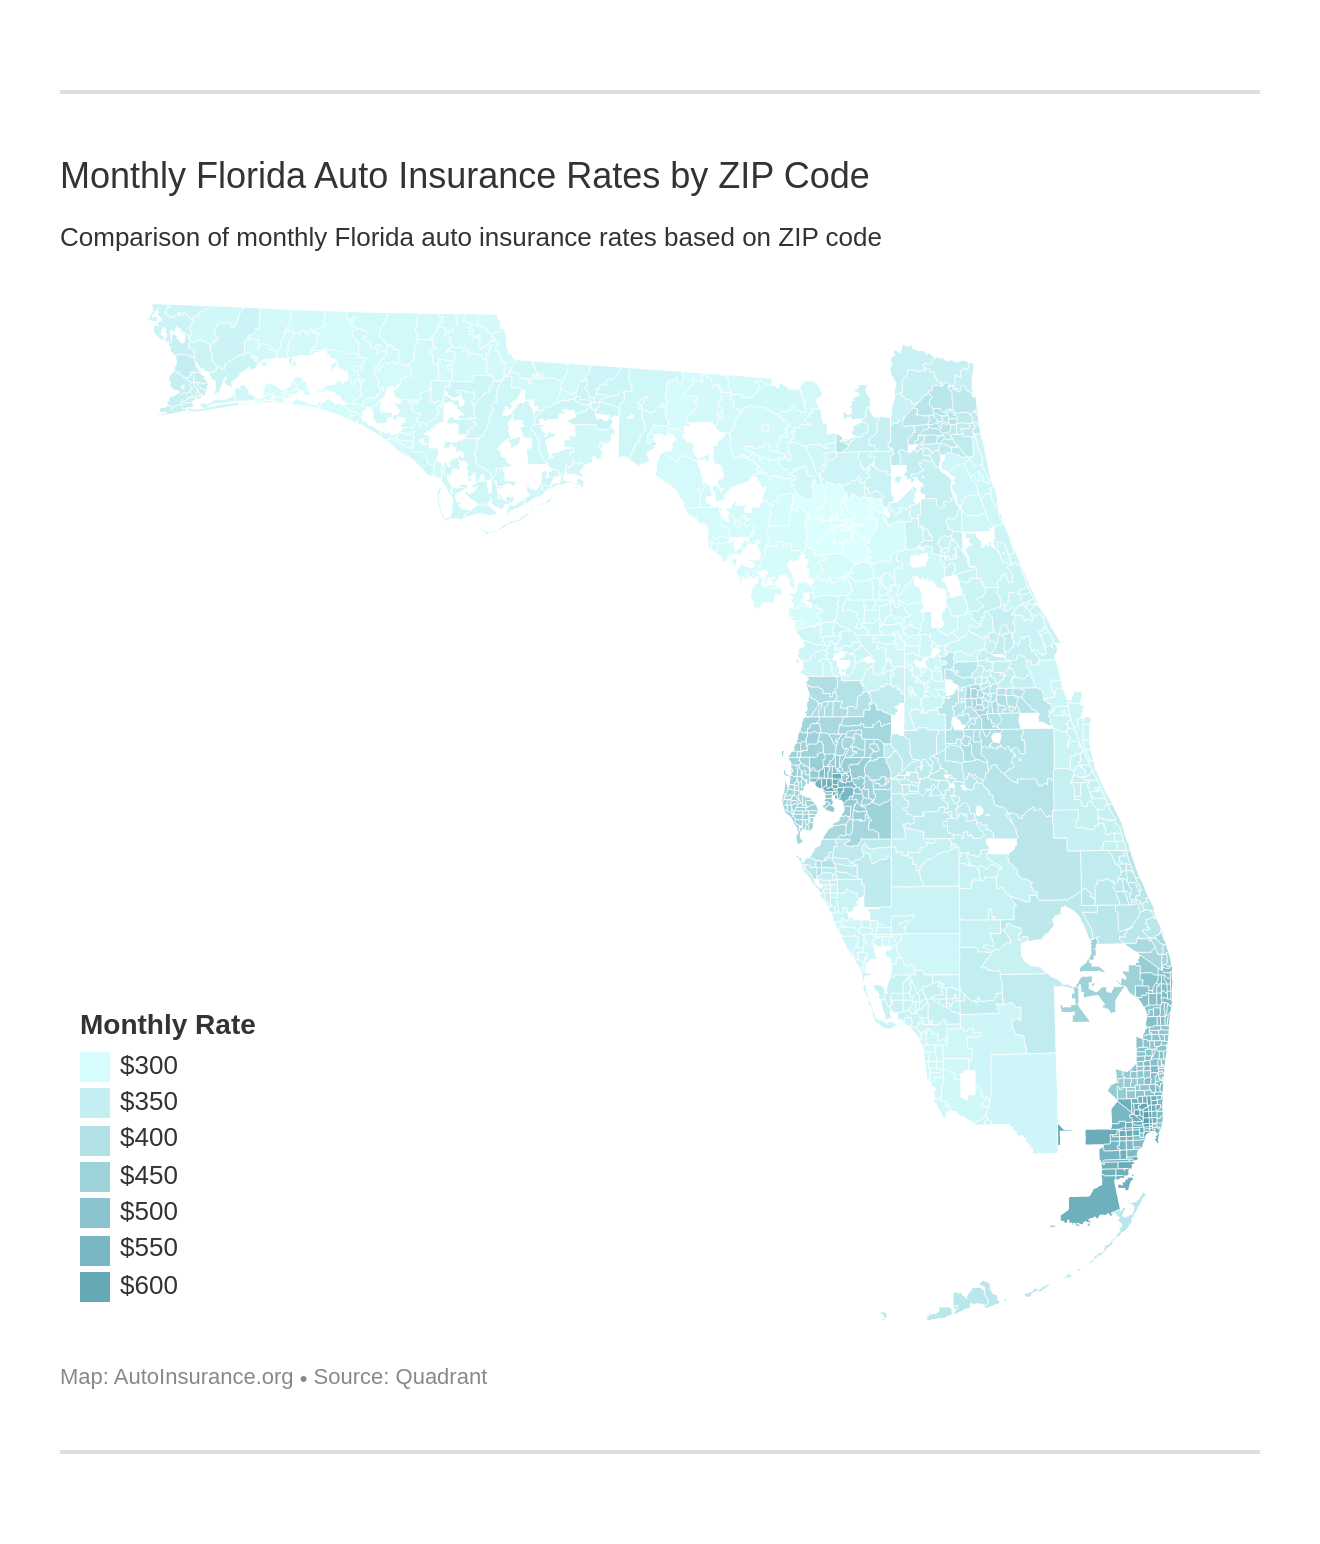 Monthly Florida Auto Insurance Rates by ZIP Code